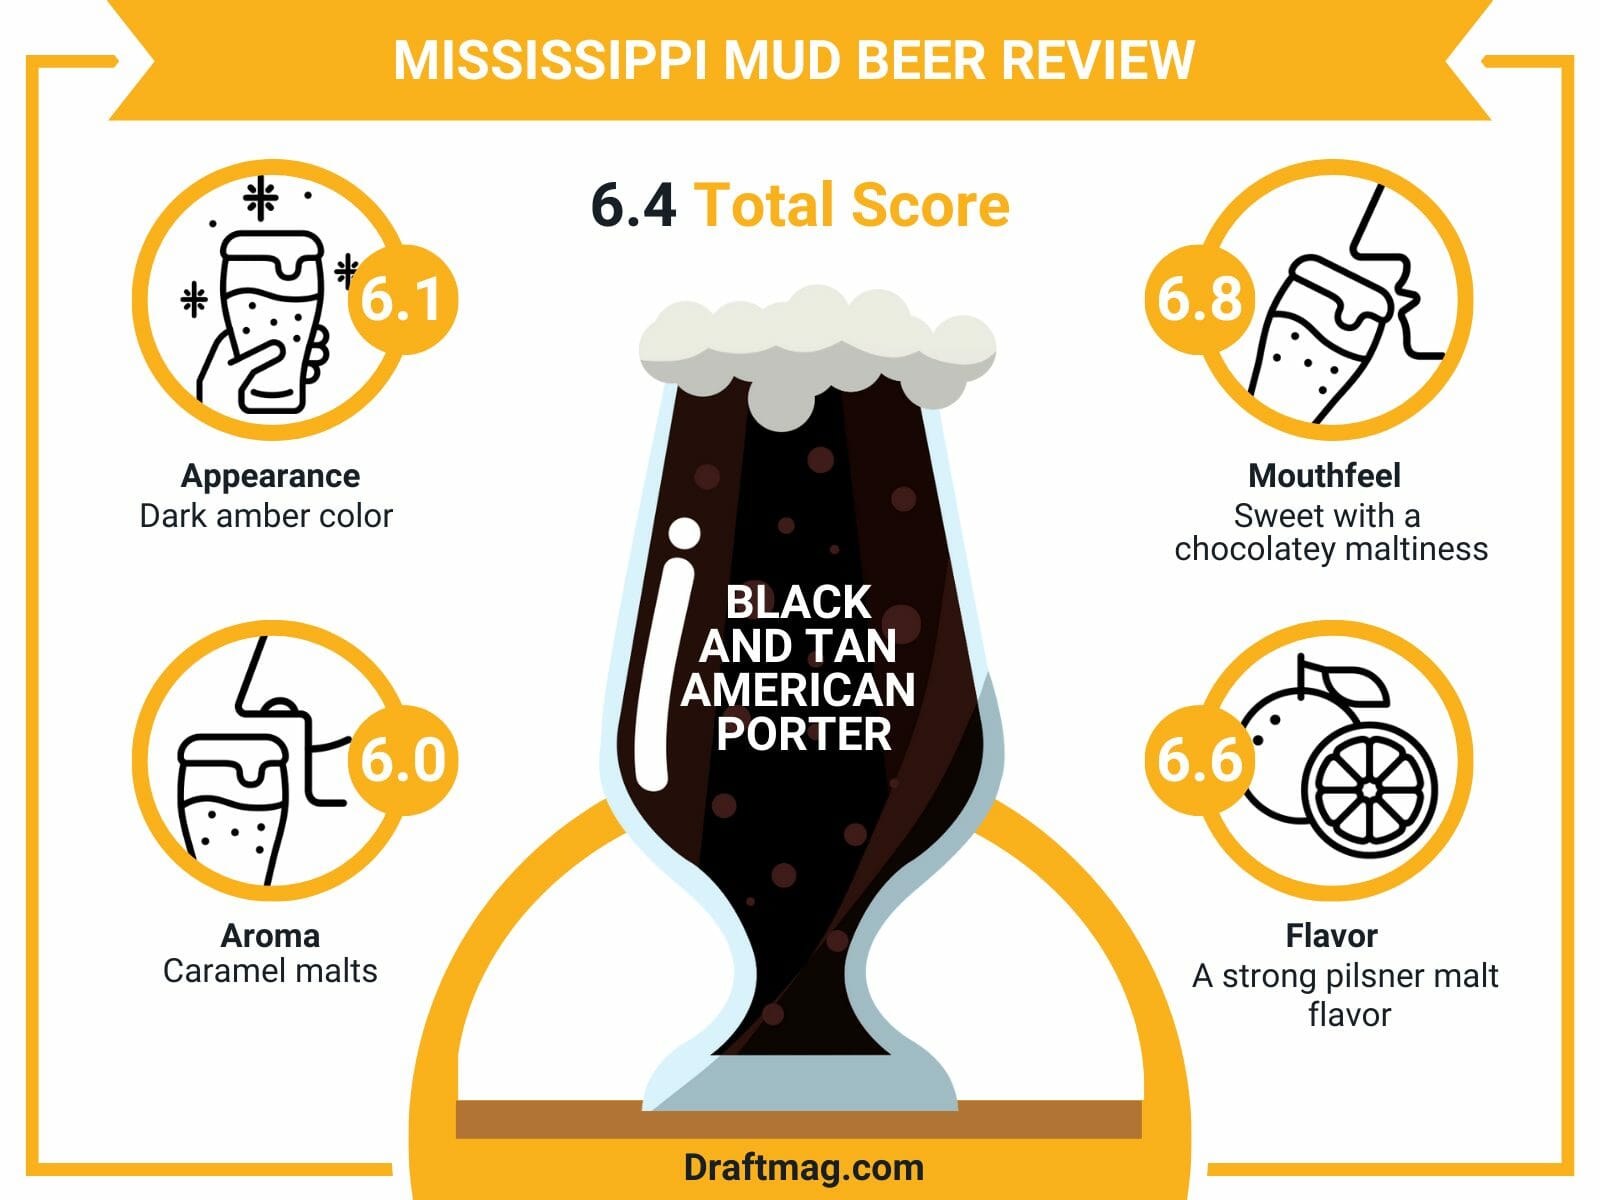 Mississippi mud beer review infographic